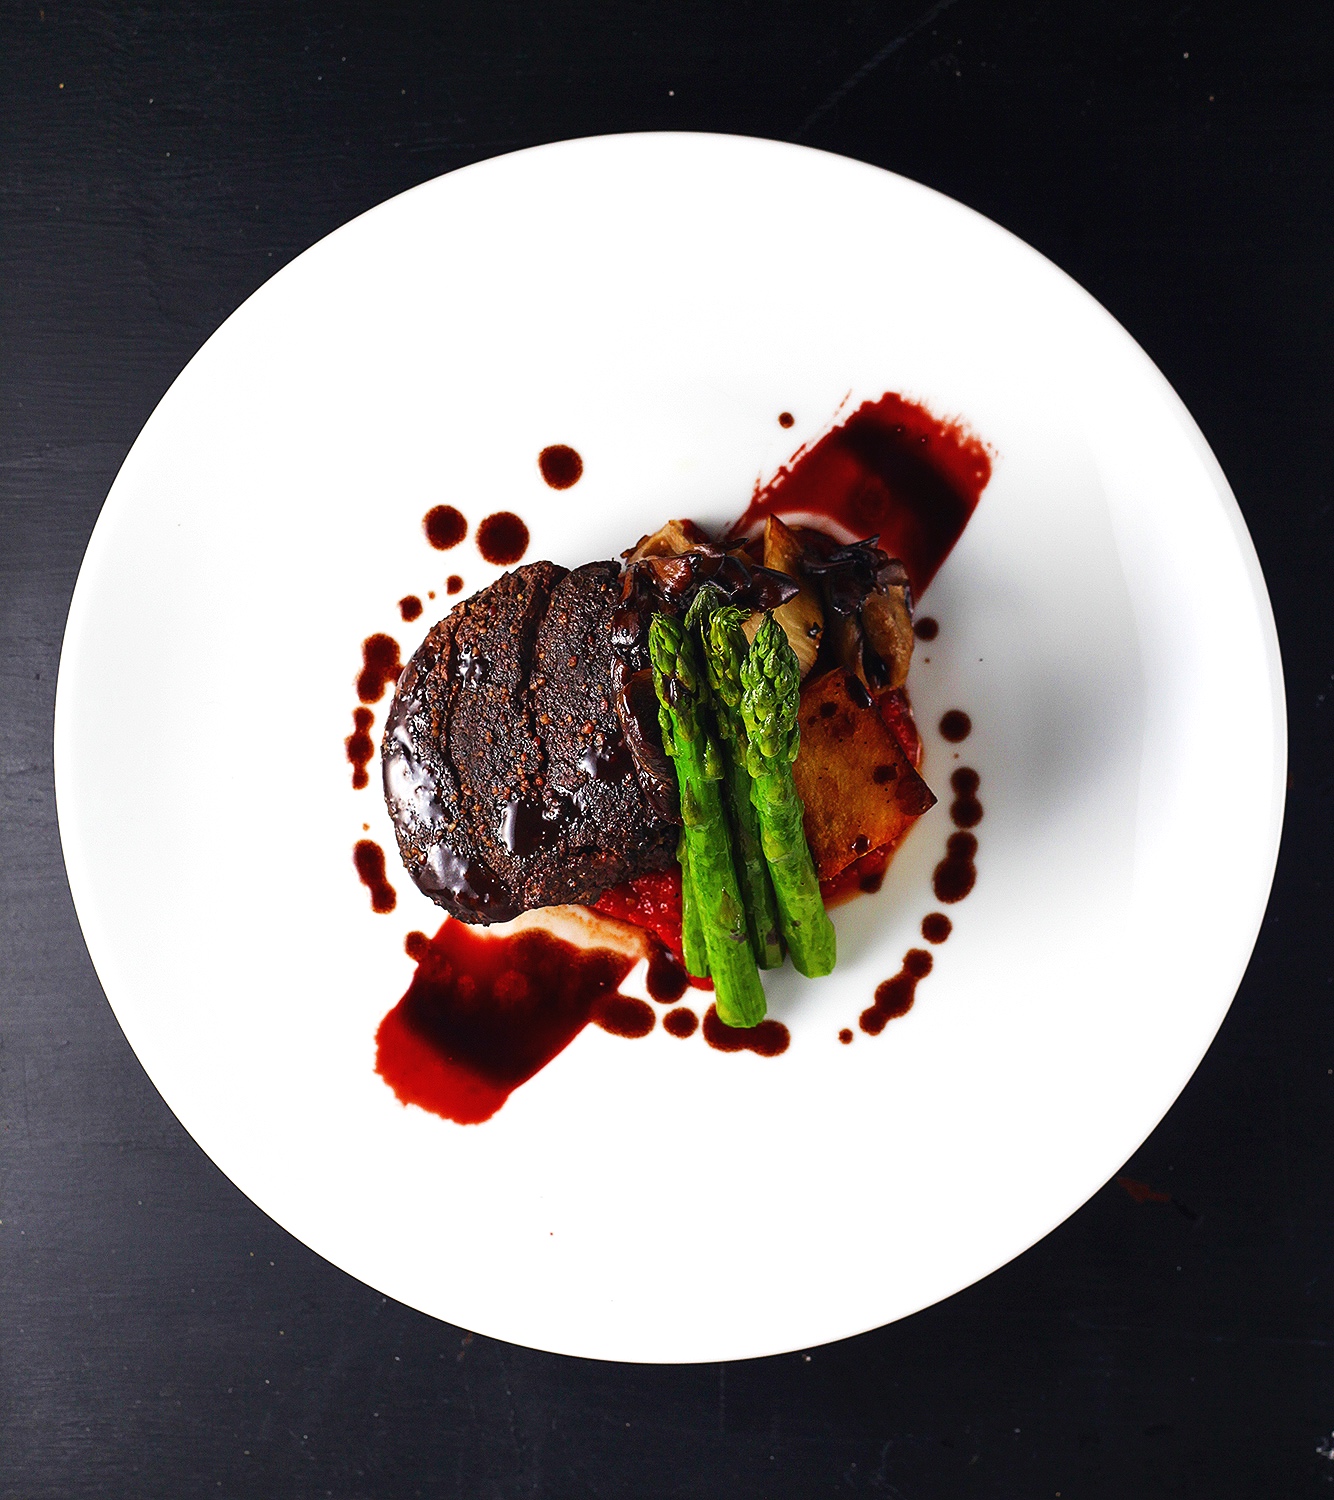 Beef tenderloin over polenta with red wine reduction and topped with asparagus